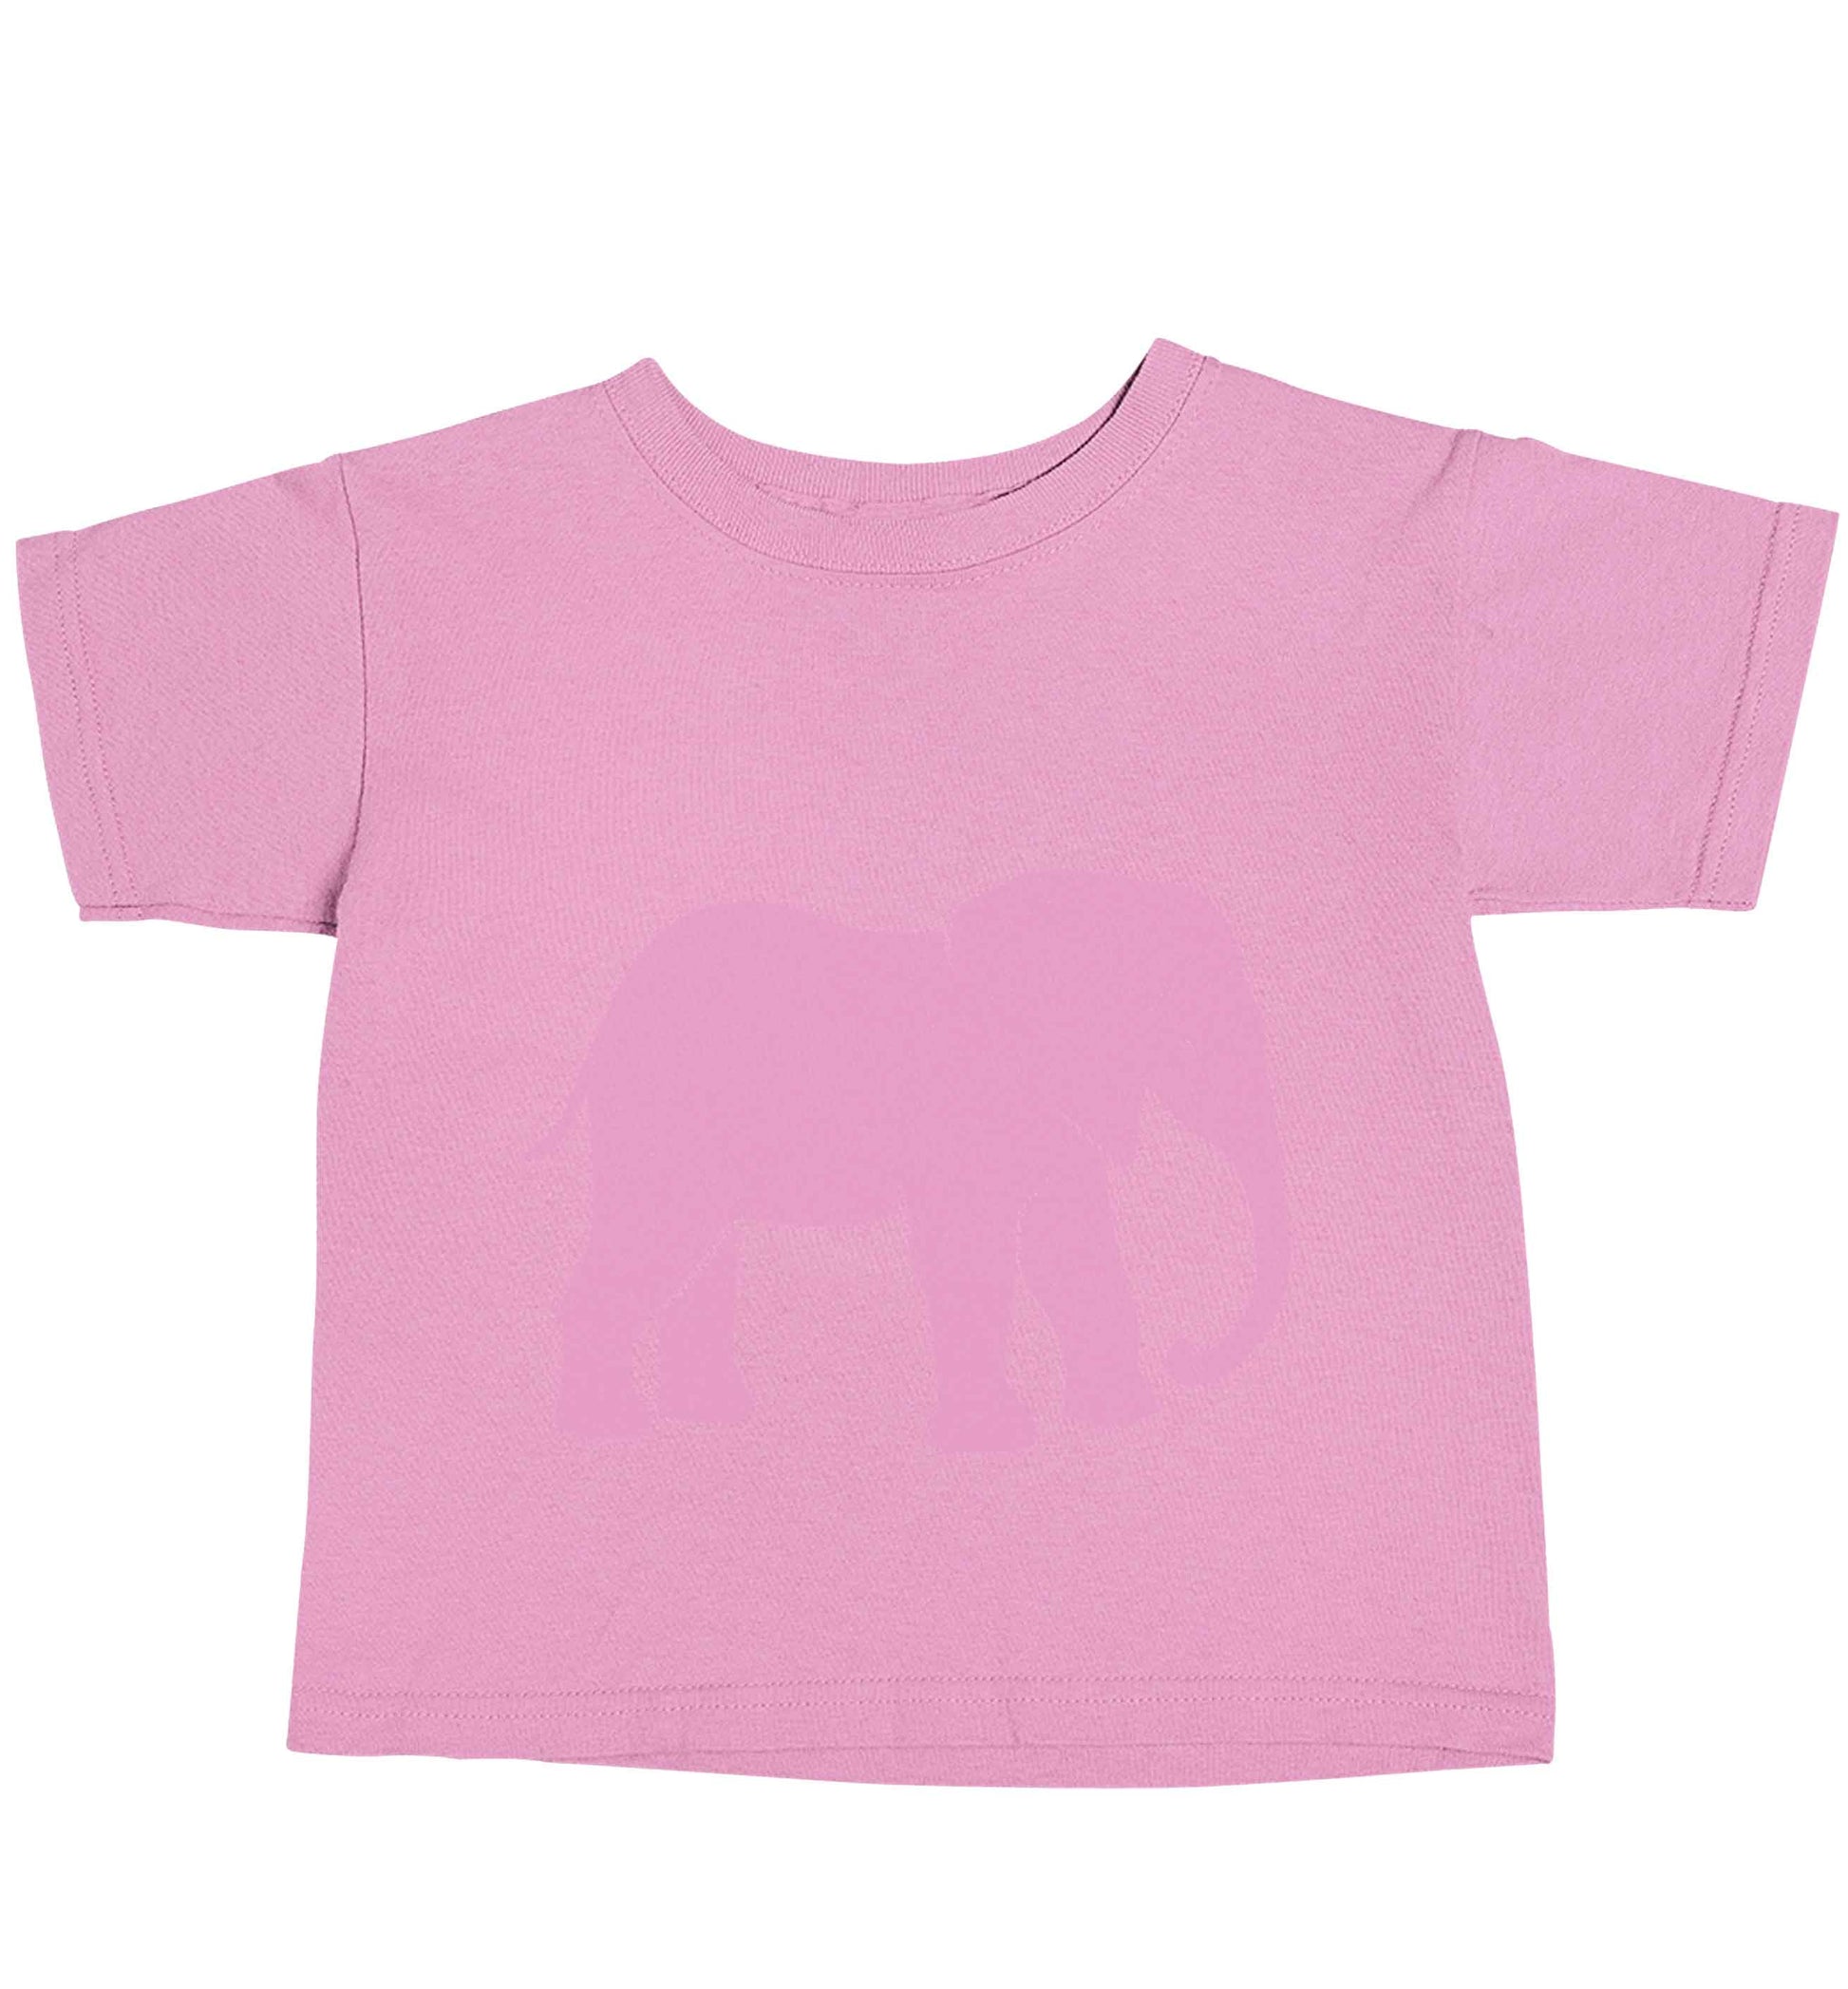 Pink elephant light pink baby toddler Tshirt 2 Years